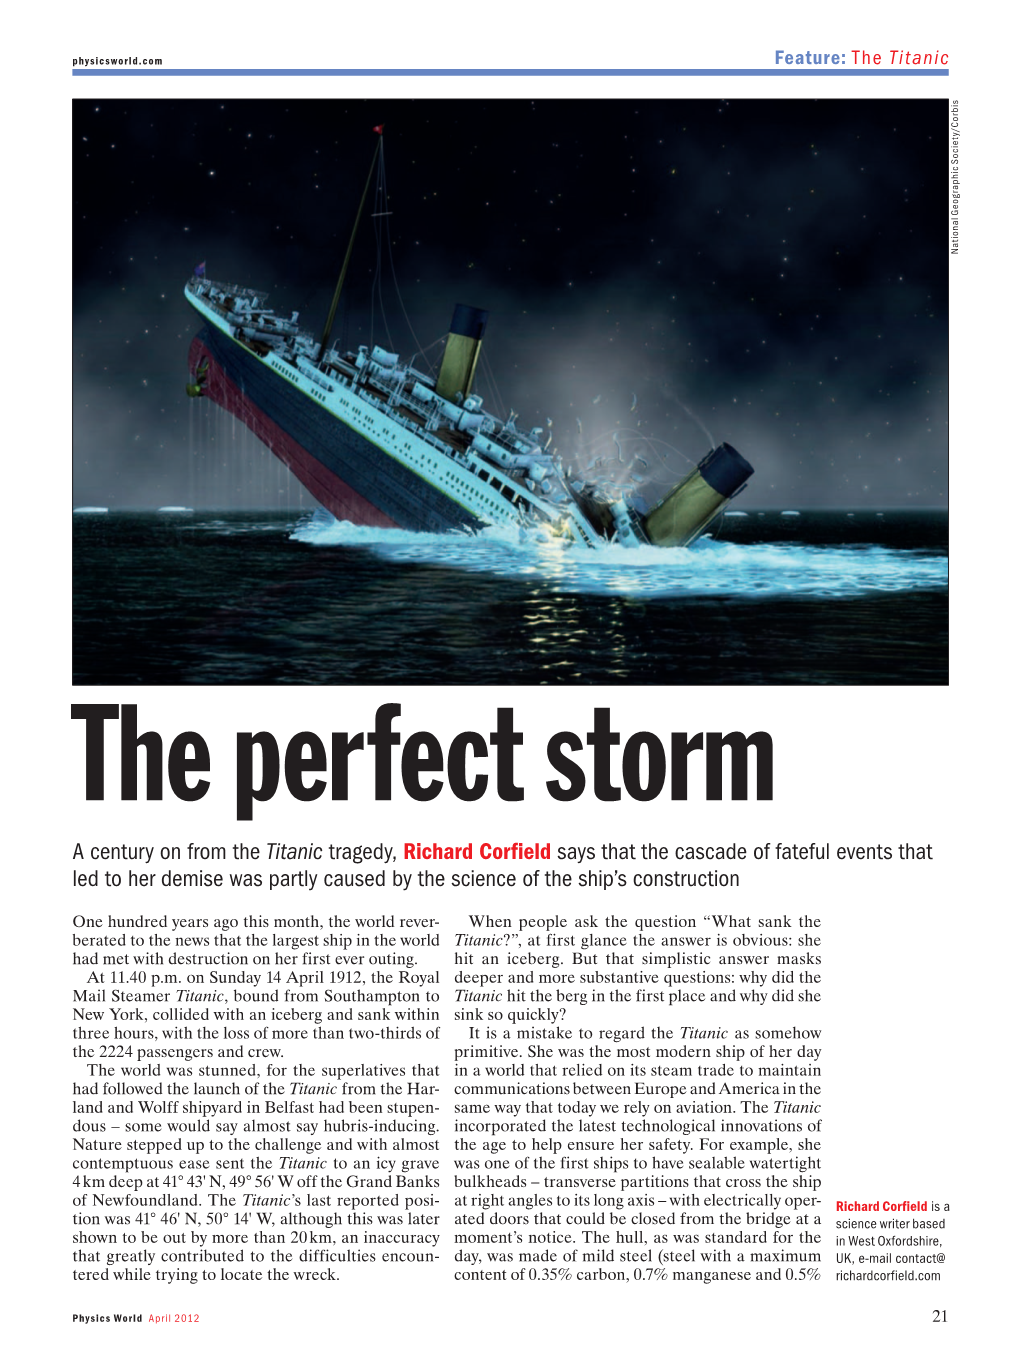 A Century on from the Titanic Tragedy, Richard Corfield Says That The